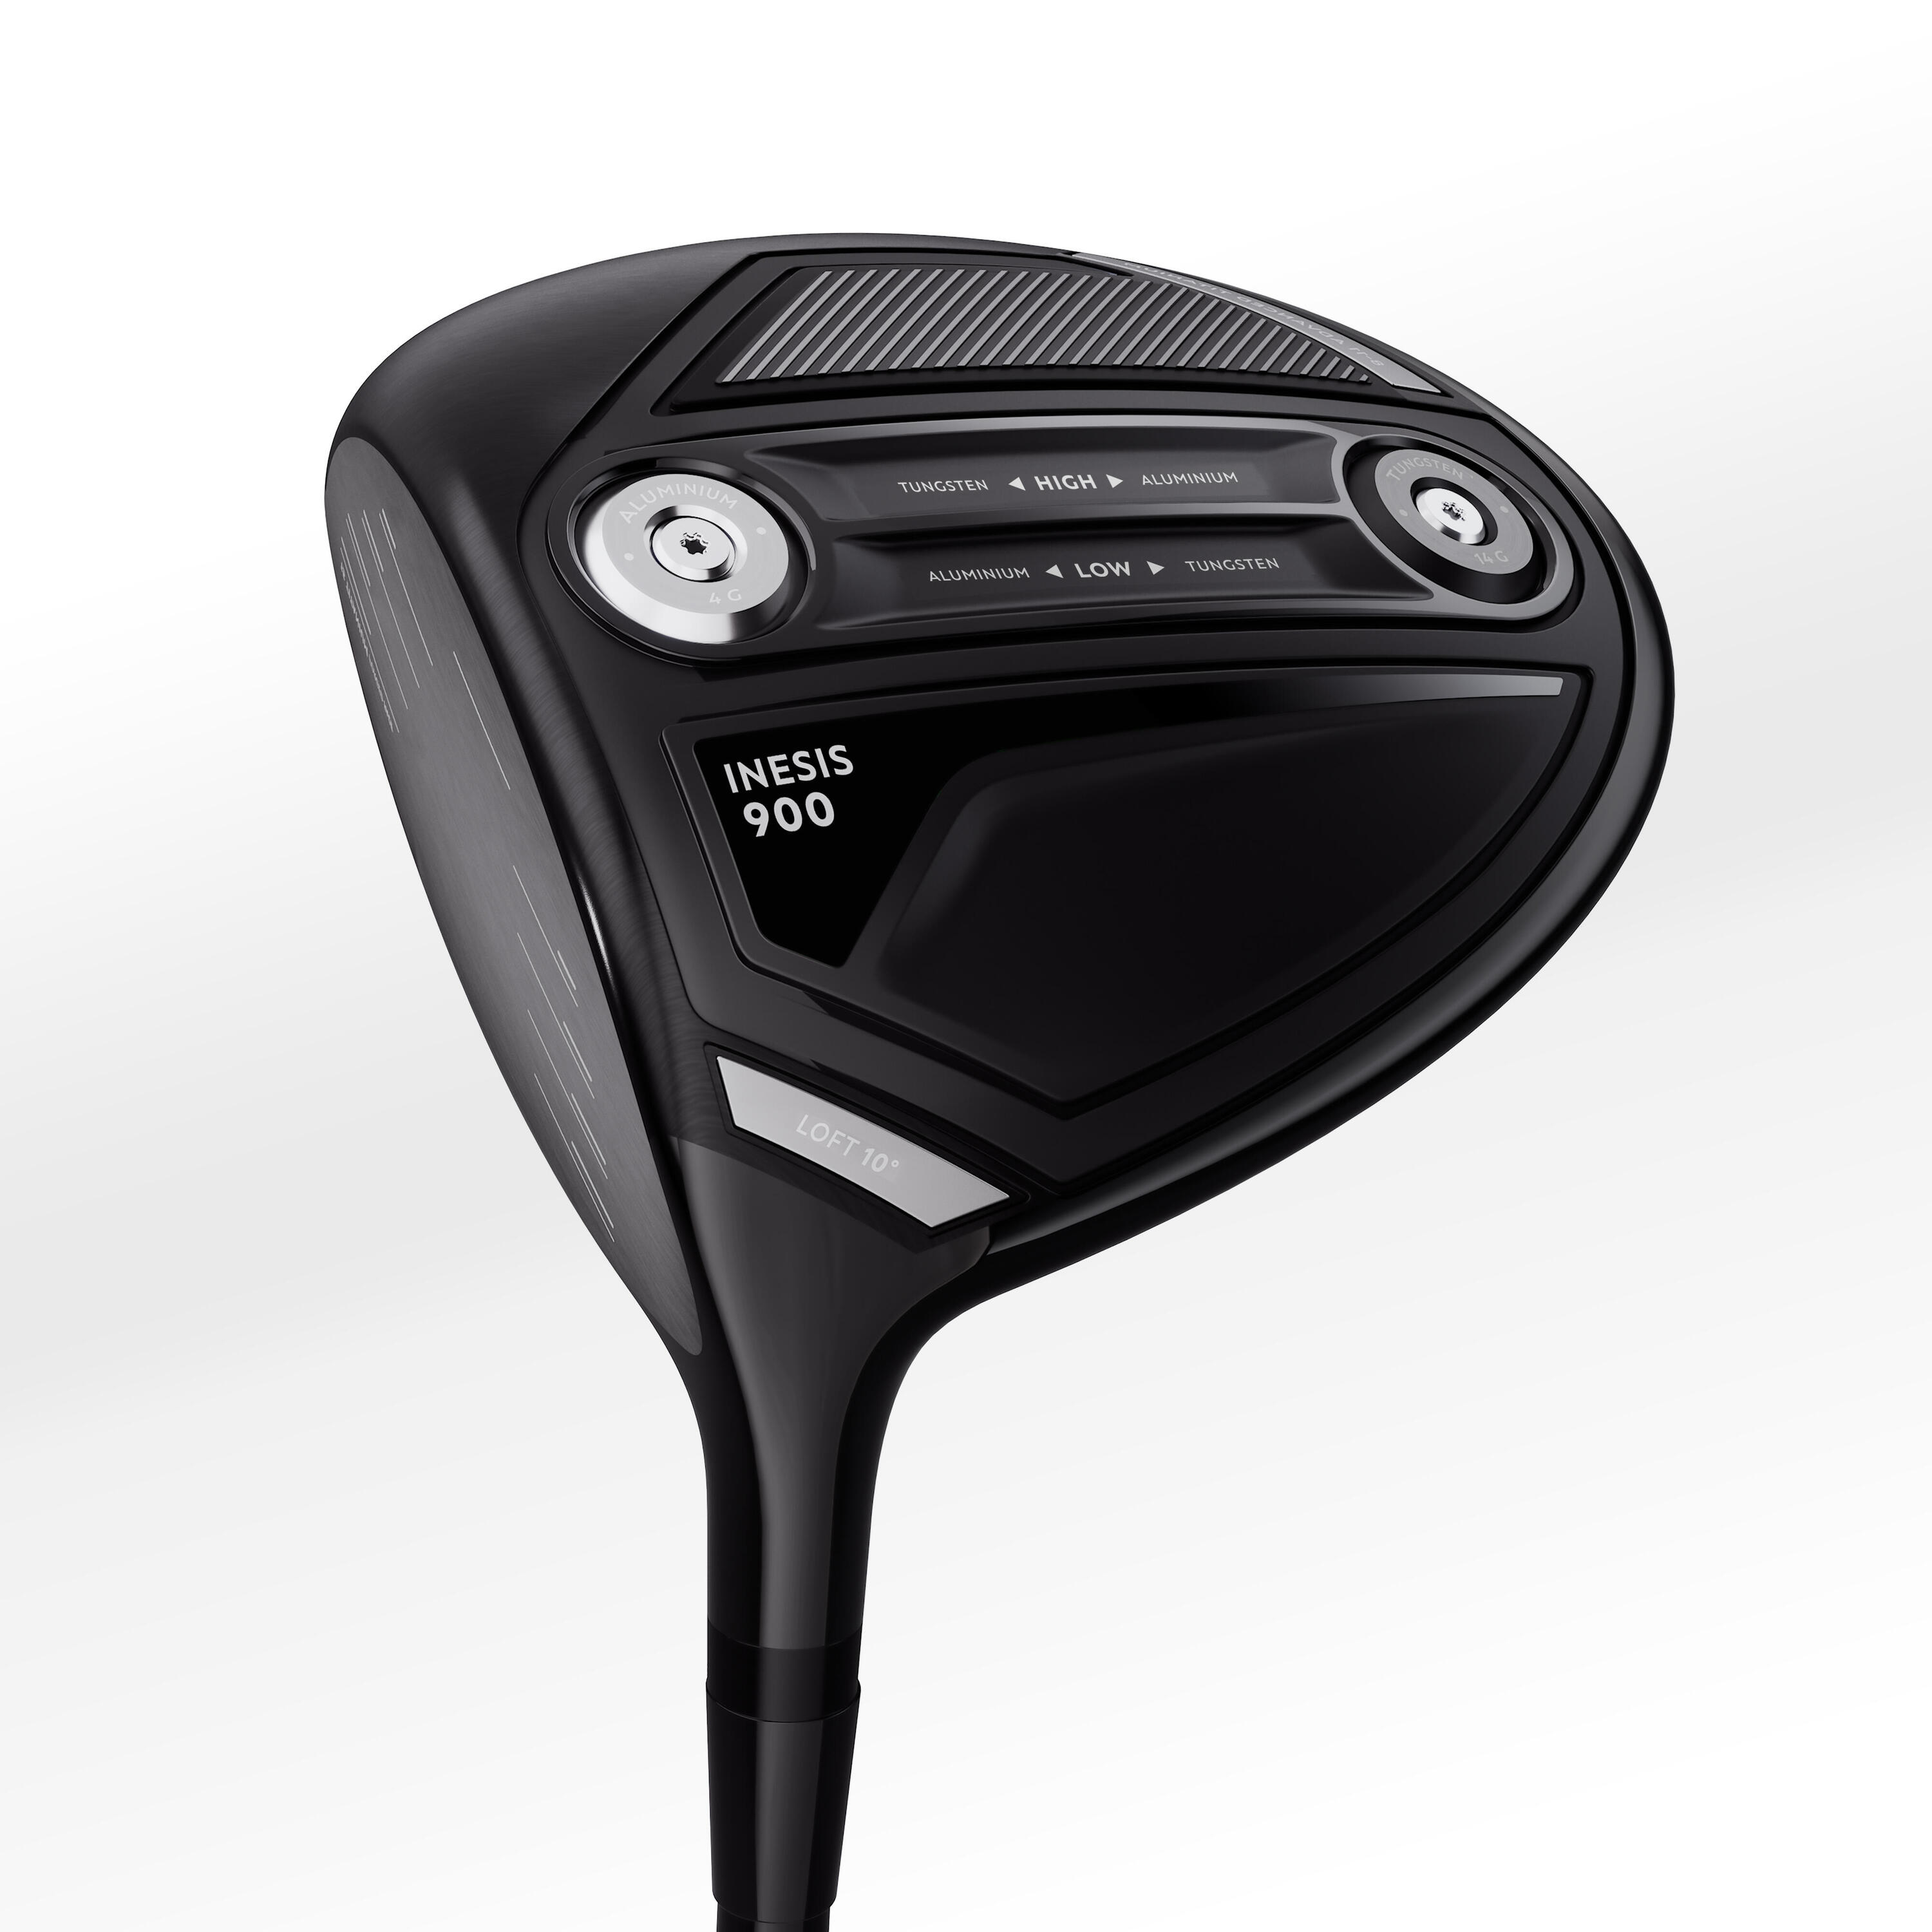 Golf driver left handed low speed - INESIS 900 1/8